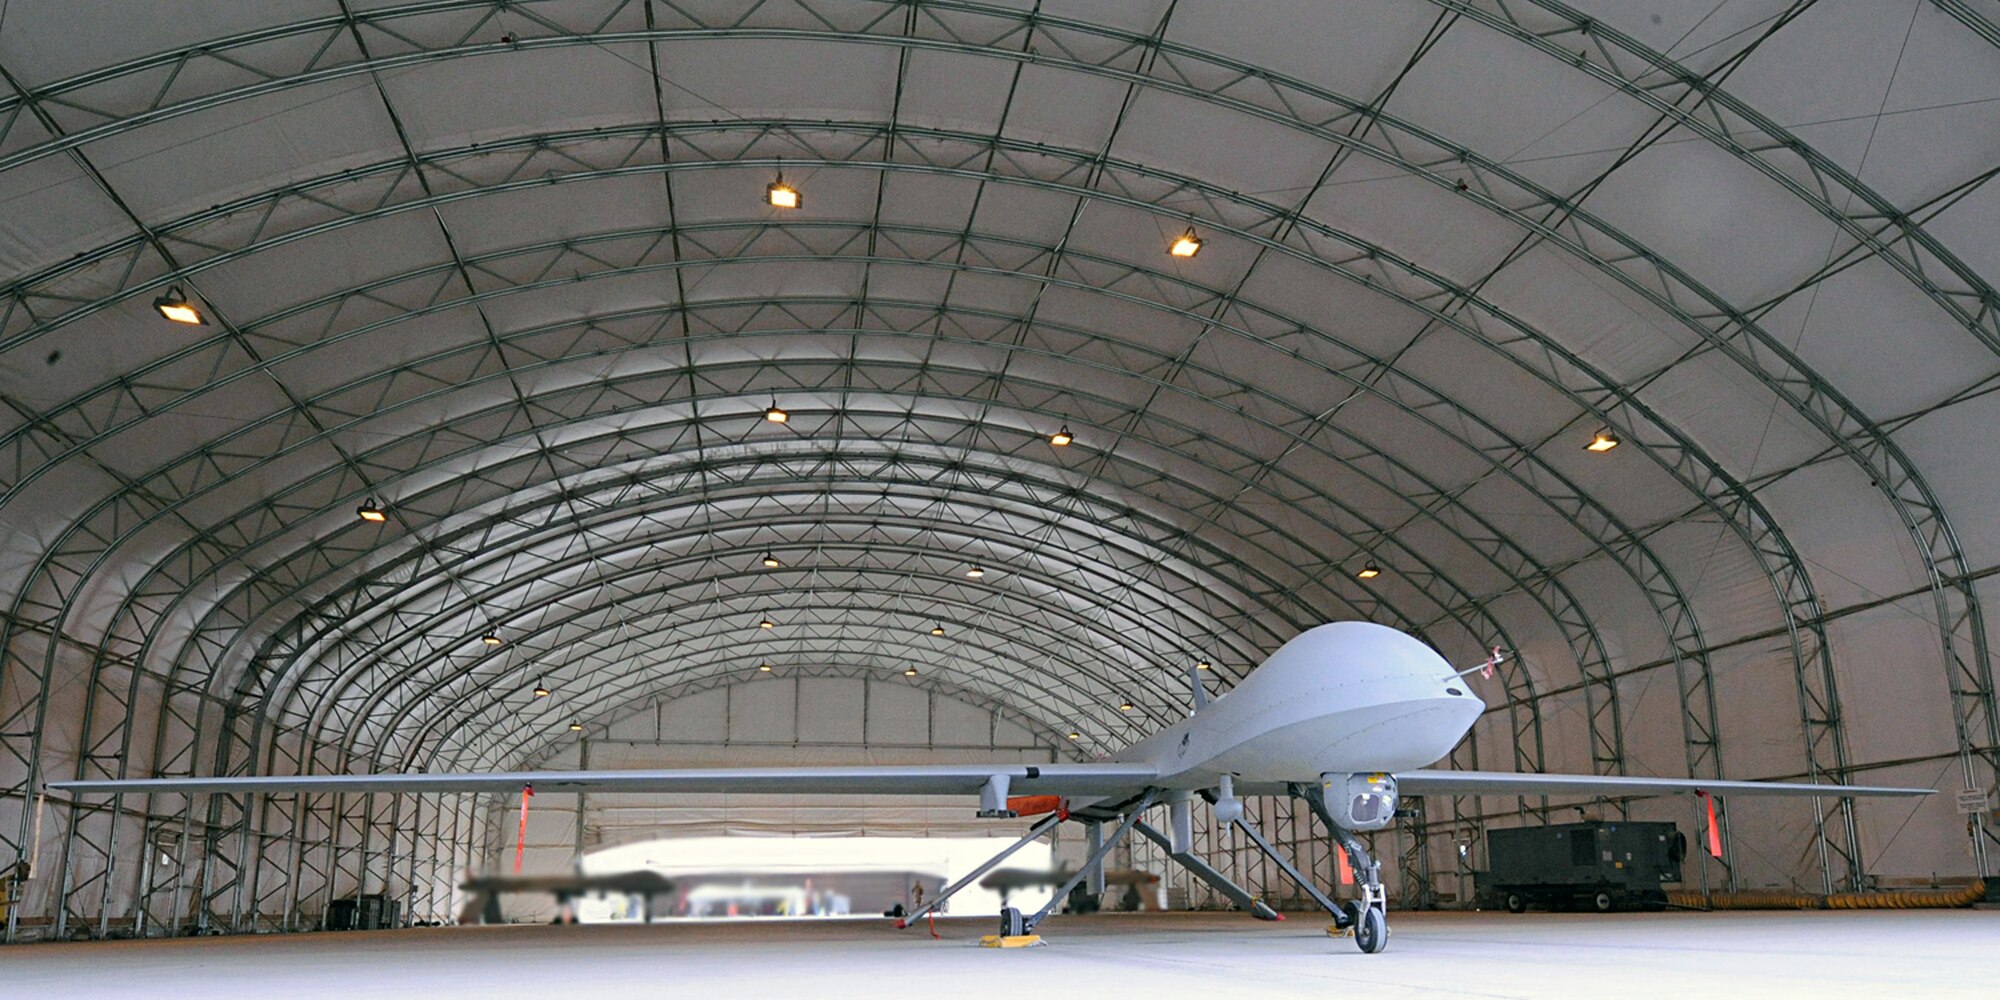 An MQ-1 Predator stands ready to take to the sky in support of the 2009 Iraqi provincial elections Jan. 30 at Joint Base Balad, Iraq. Fourteen of Iraq's 18 provinces will take part in the historic event, the first election since 2005. (U.S. Air Force photo/Senior Airman Tiffany Trojca)